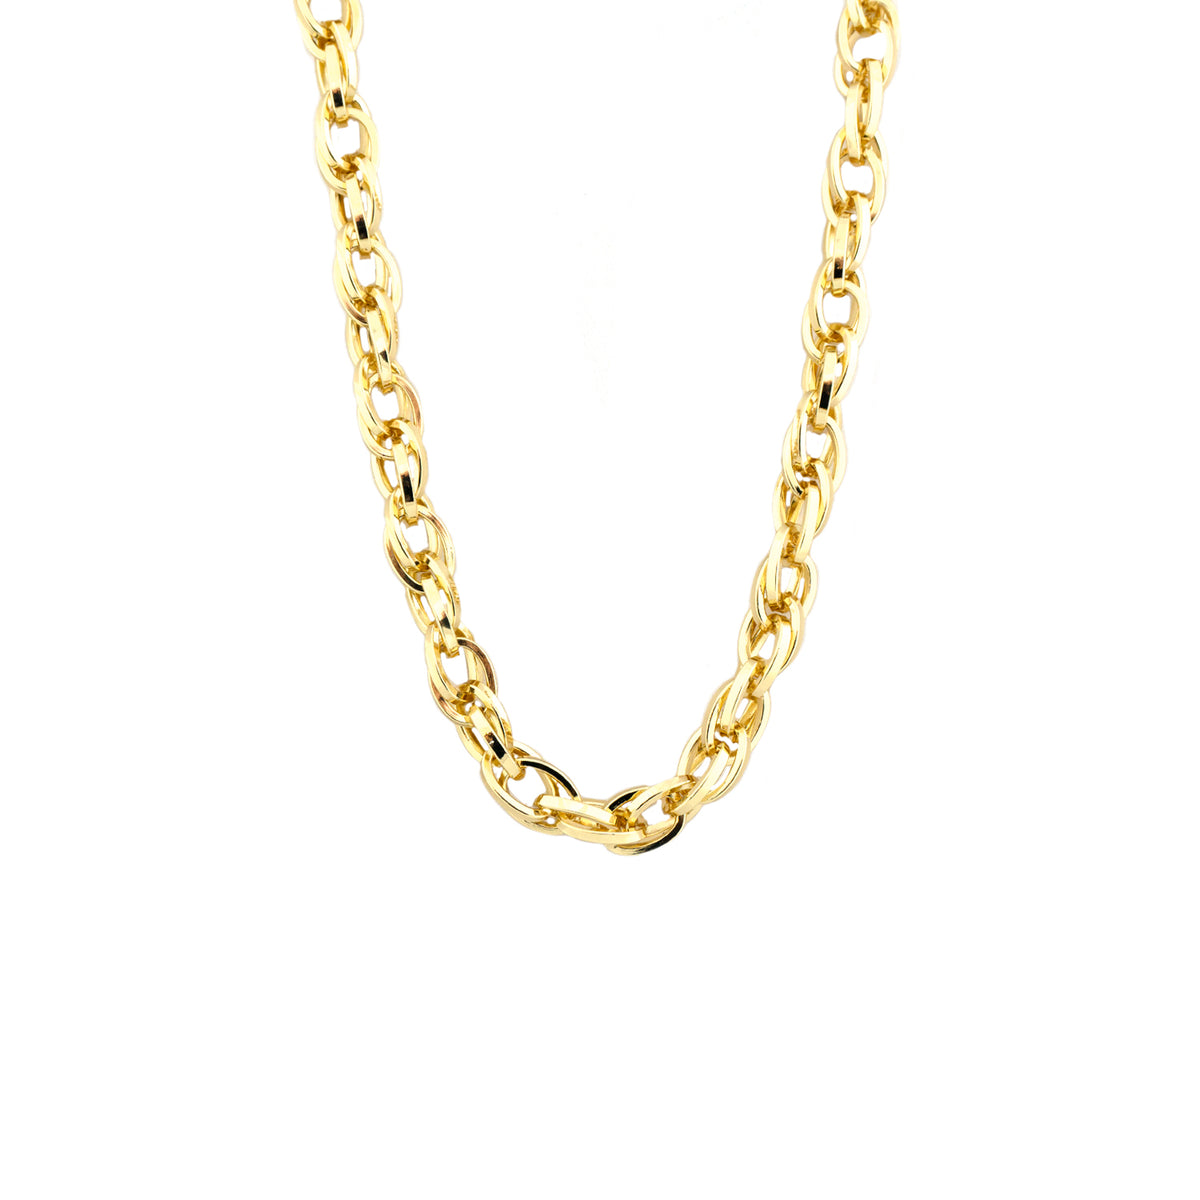 double layered necklace – Marlyn Schiff, LLC